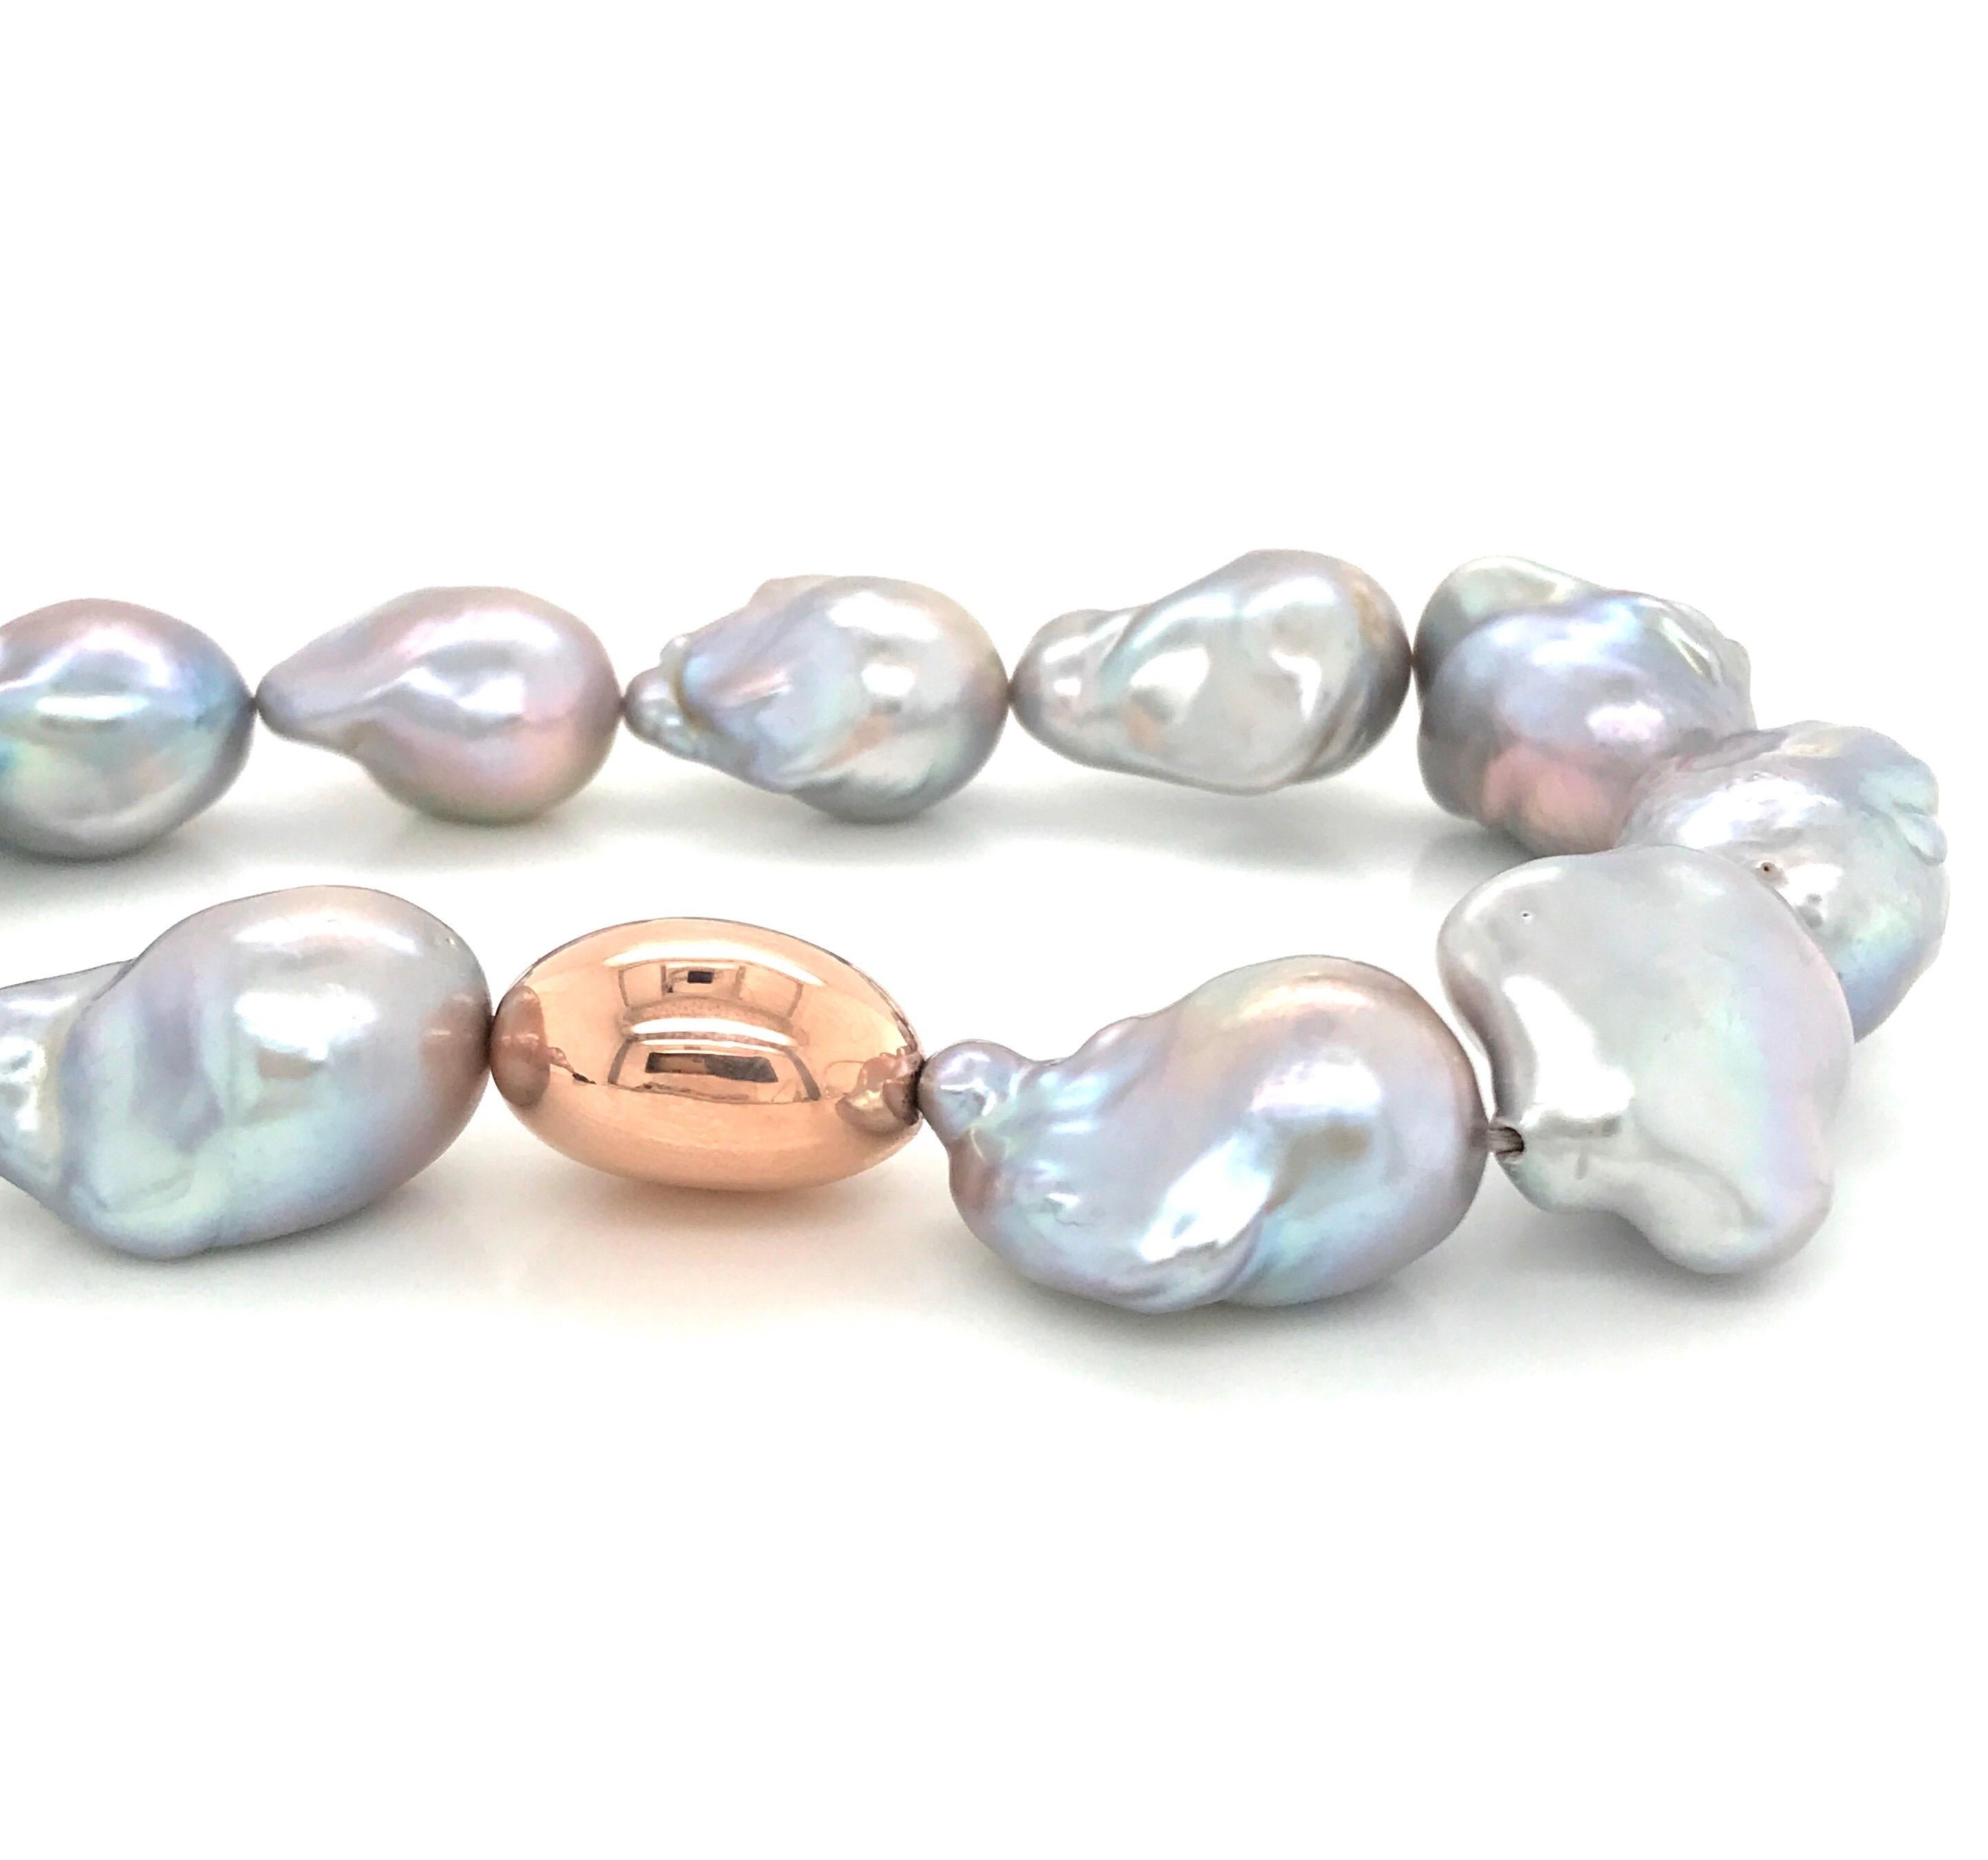 Uncut South Sea Grey Baroque Pearl with Pink Gold Necklace